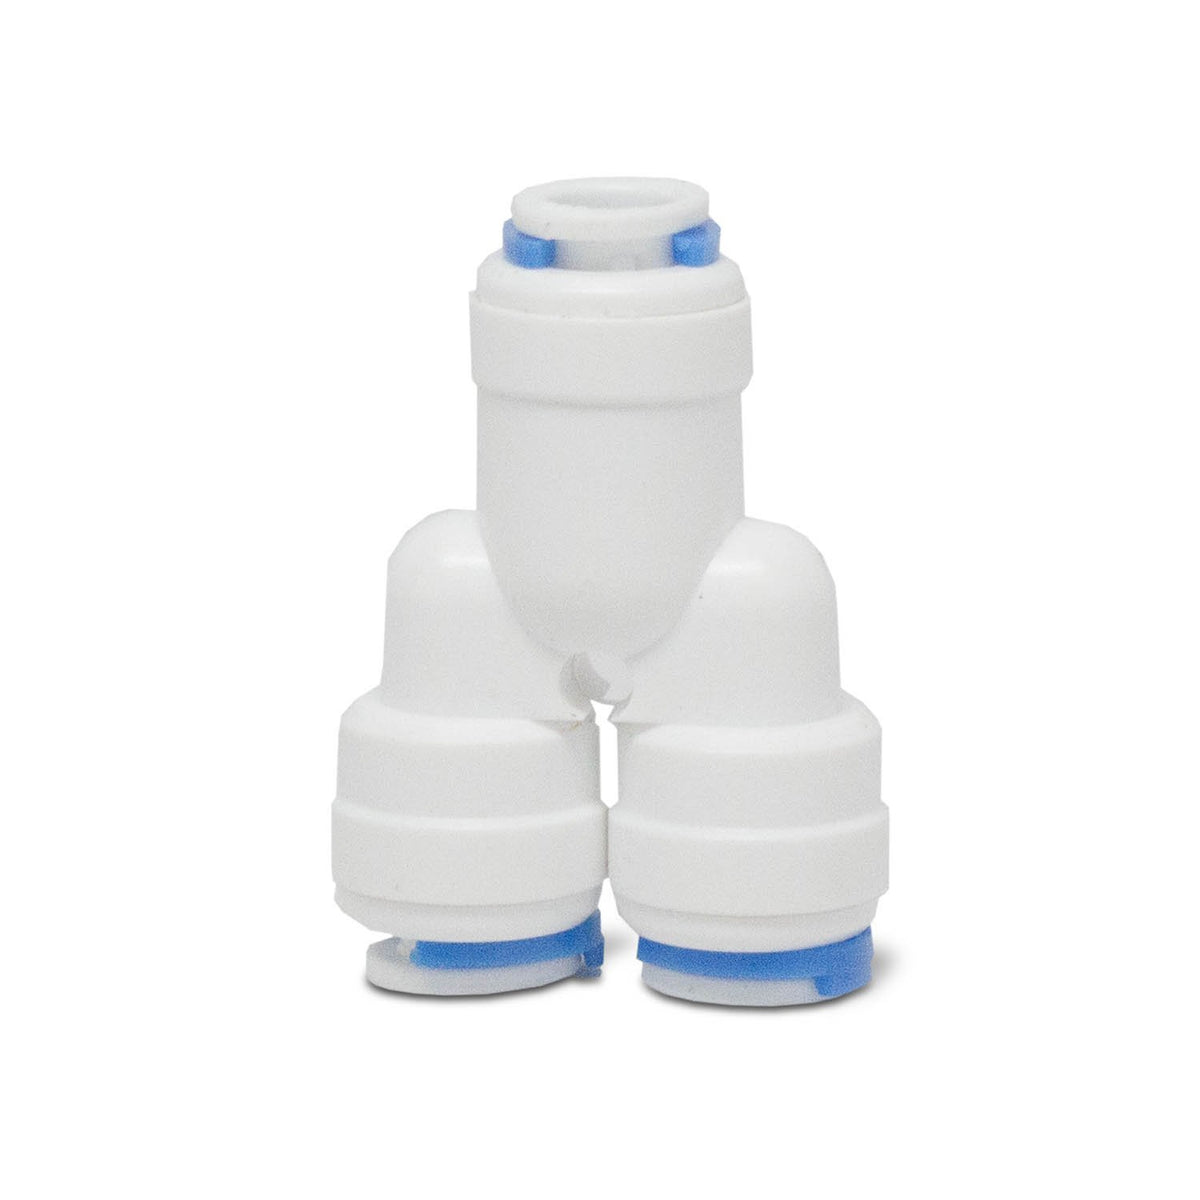 1/4" Quick Connect Y Fitting - Parts - Crystal Quest Water Filters